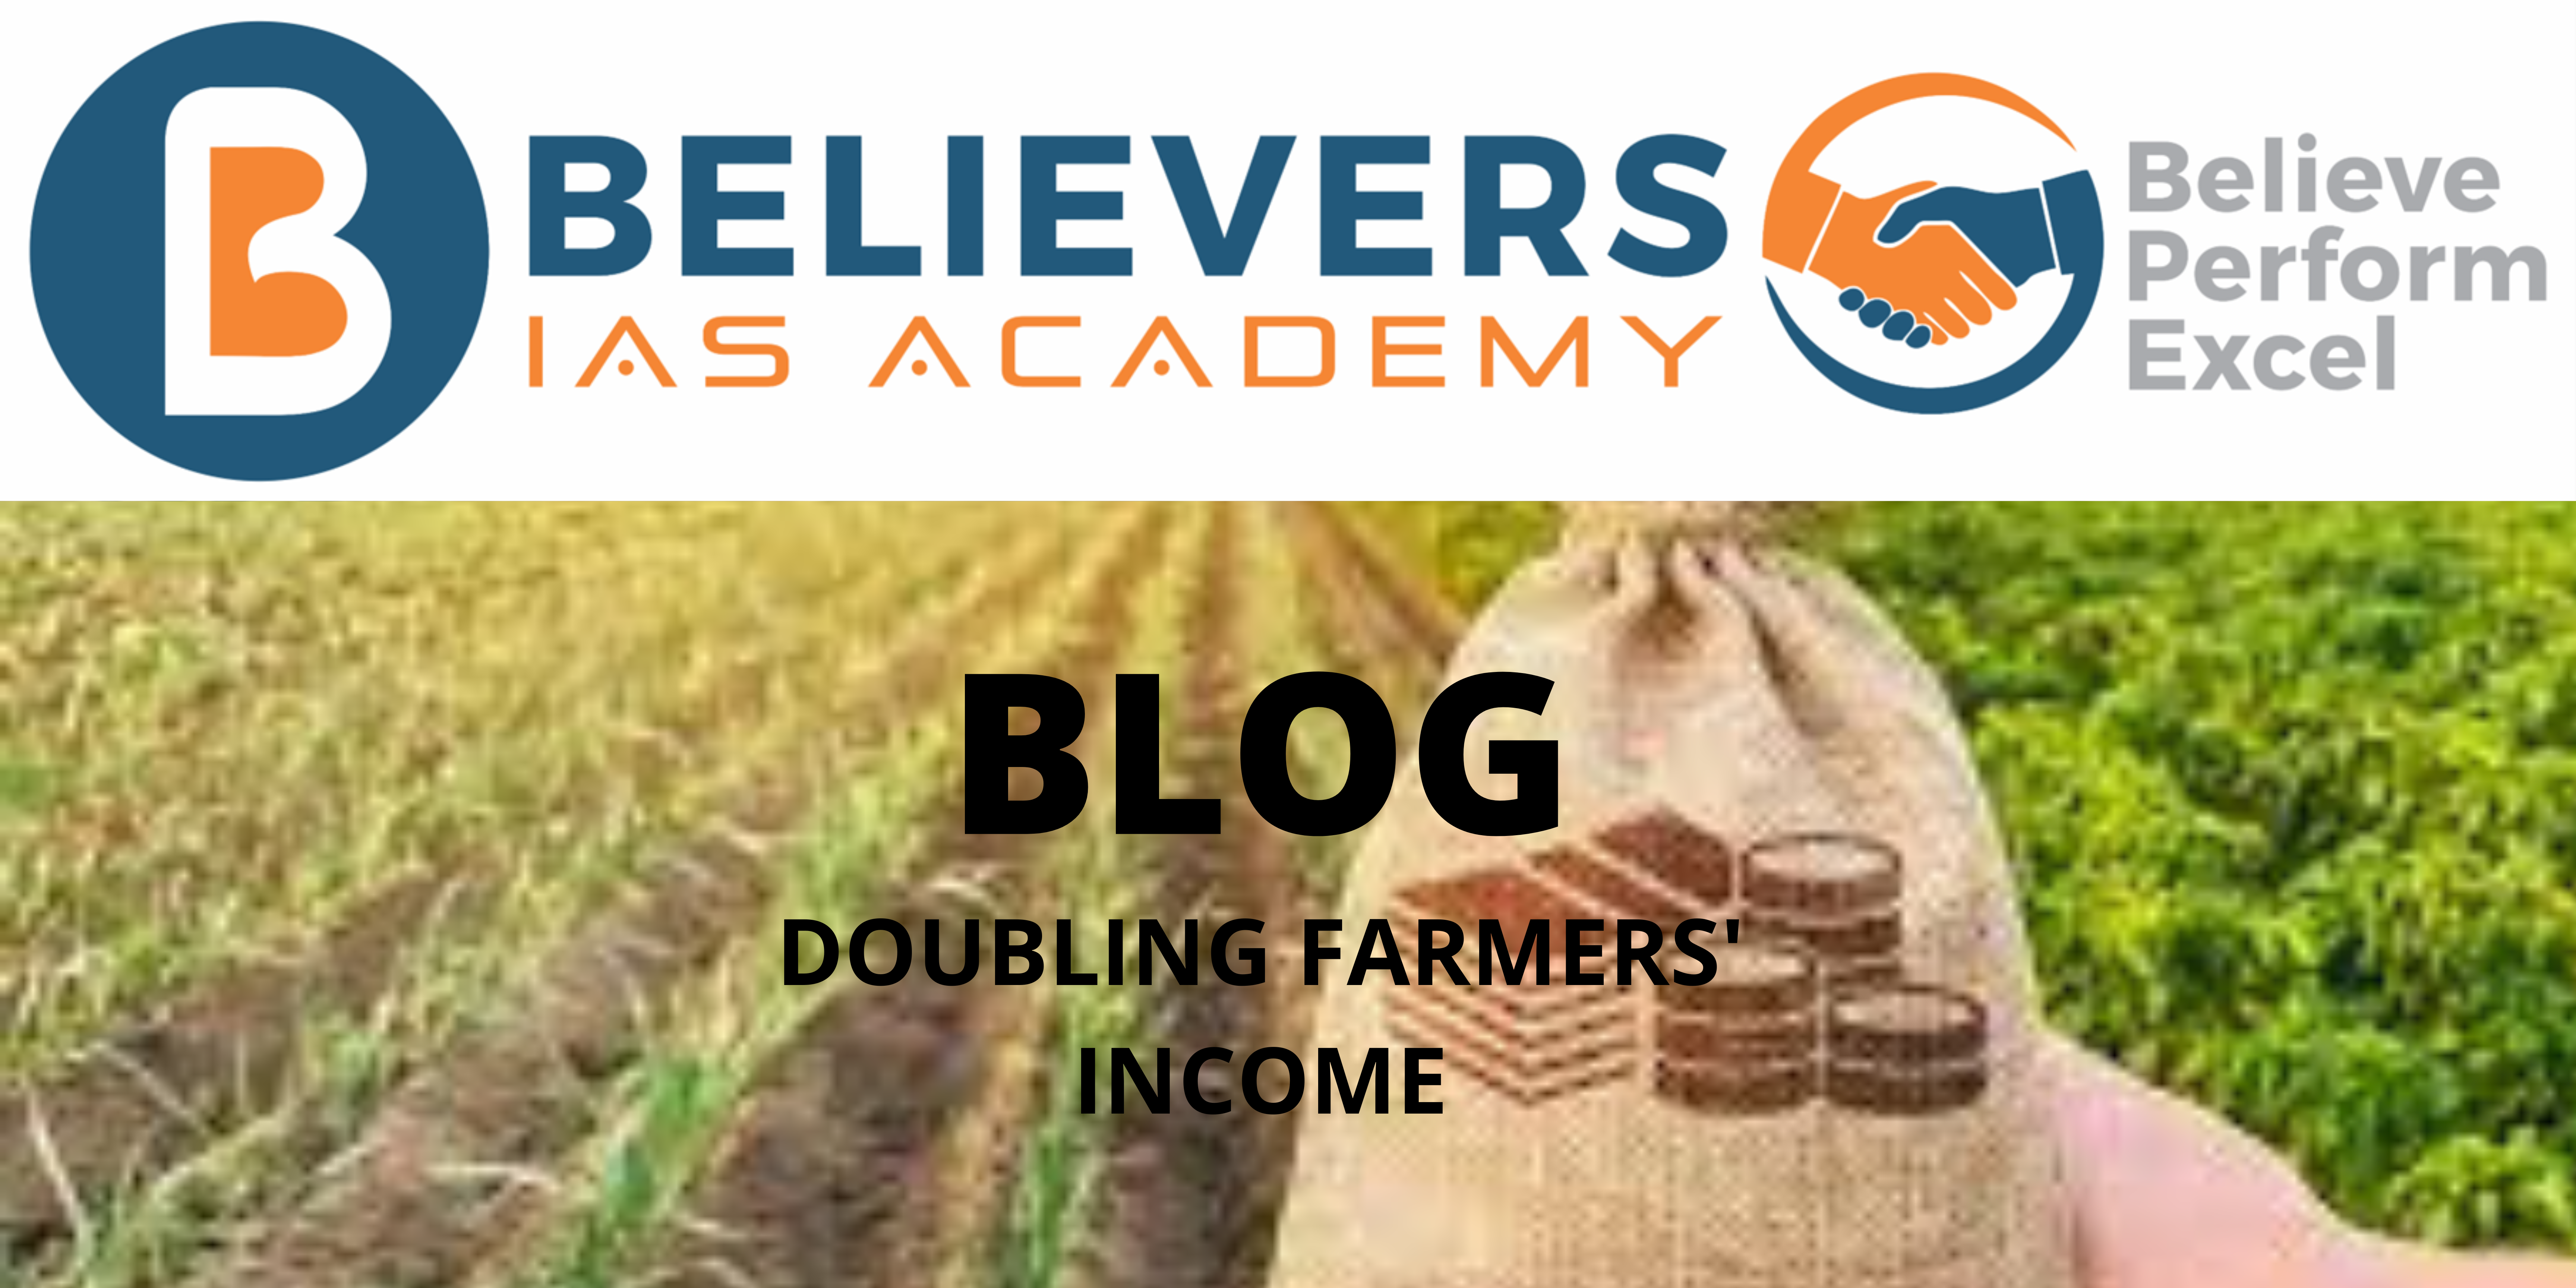 DOUBLING FARMERS' INCOME